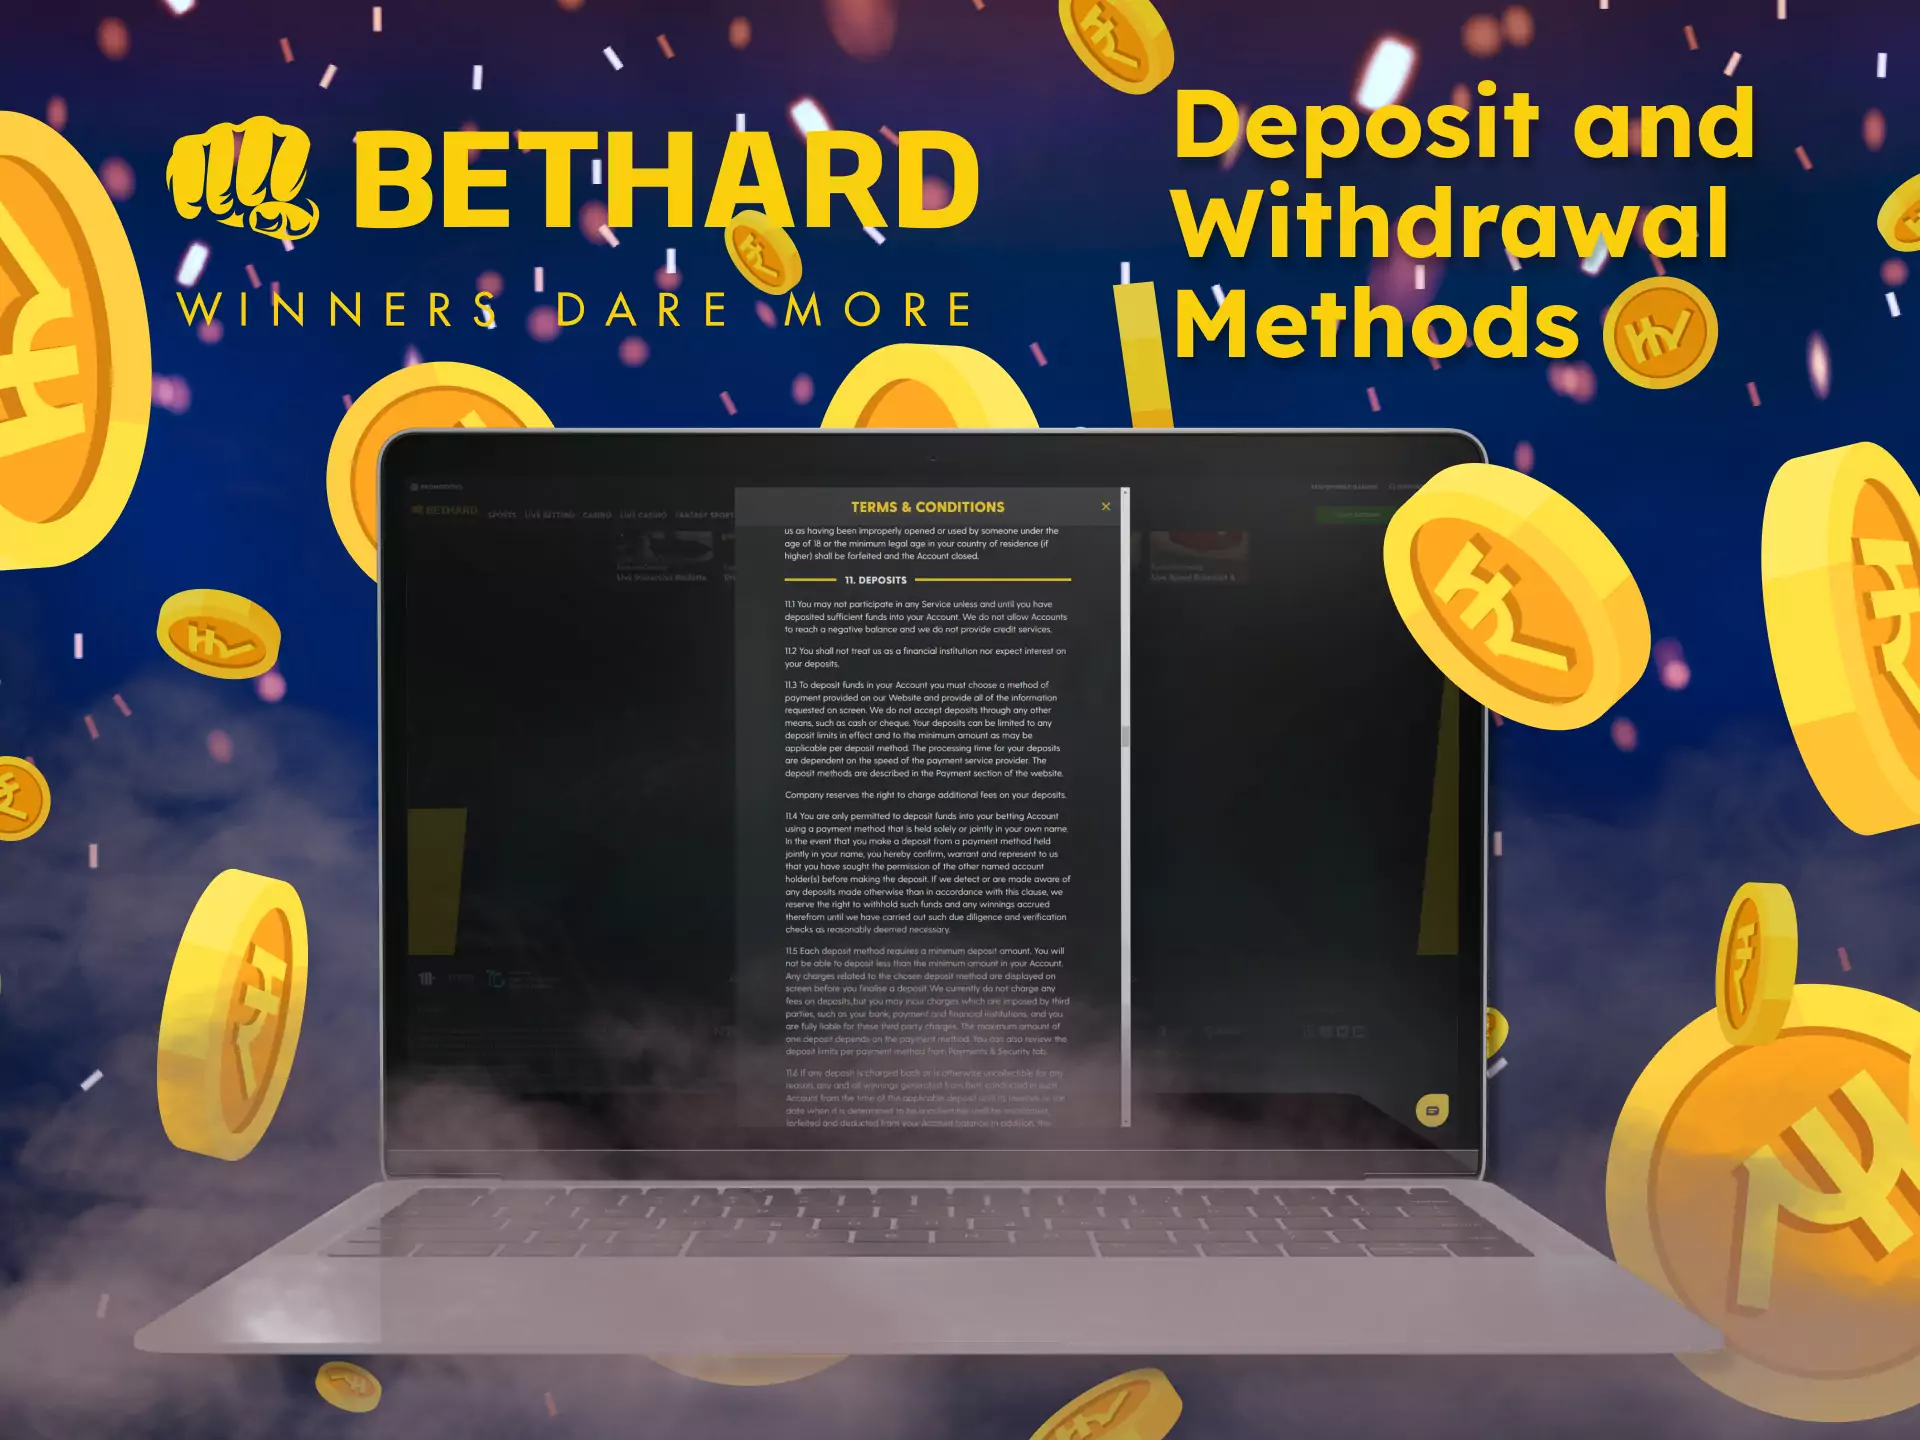 Learn how to deposit and withdraw money from your Bethard account.